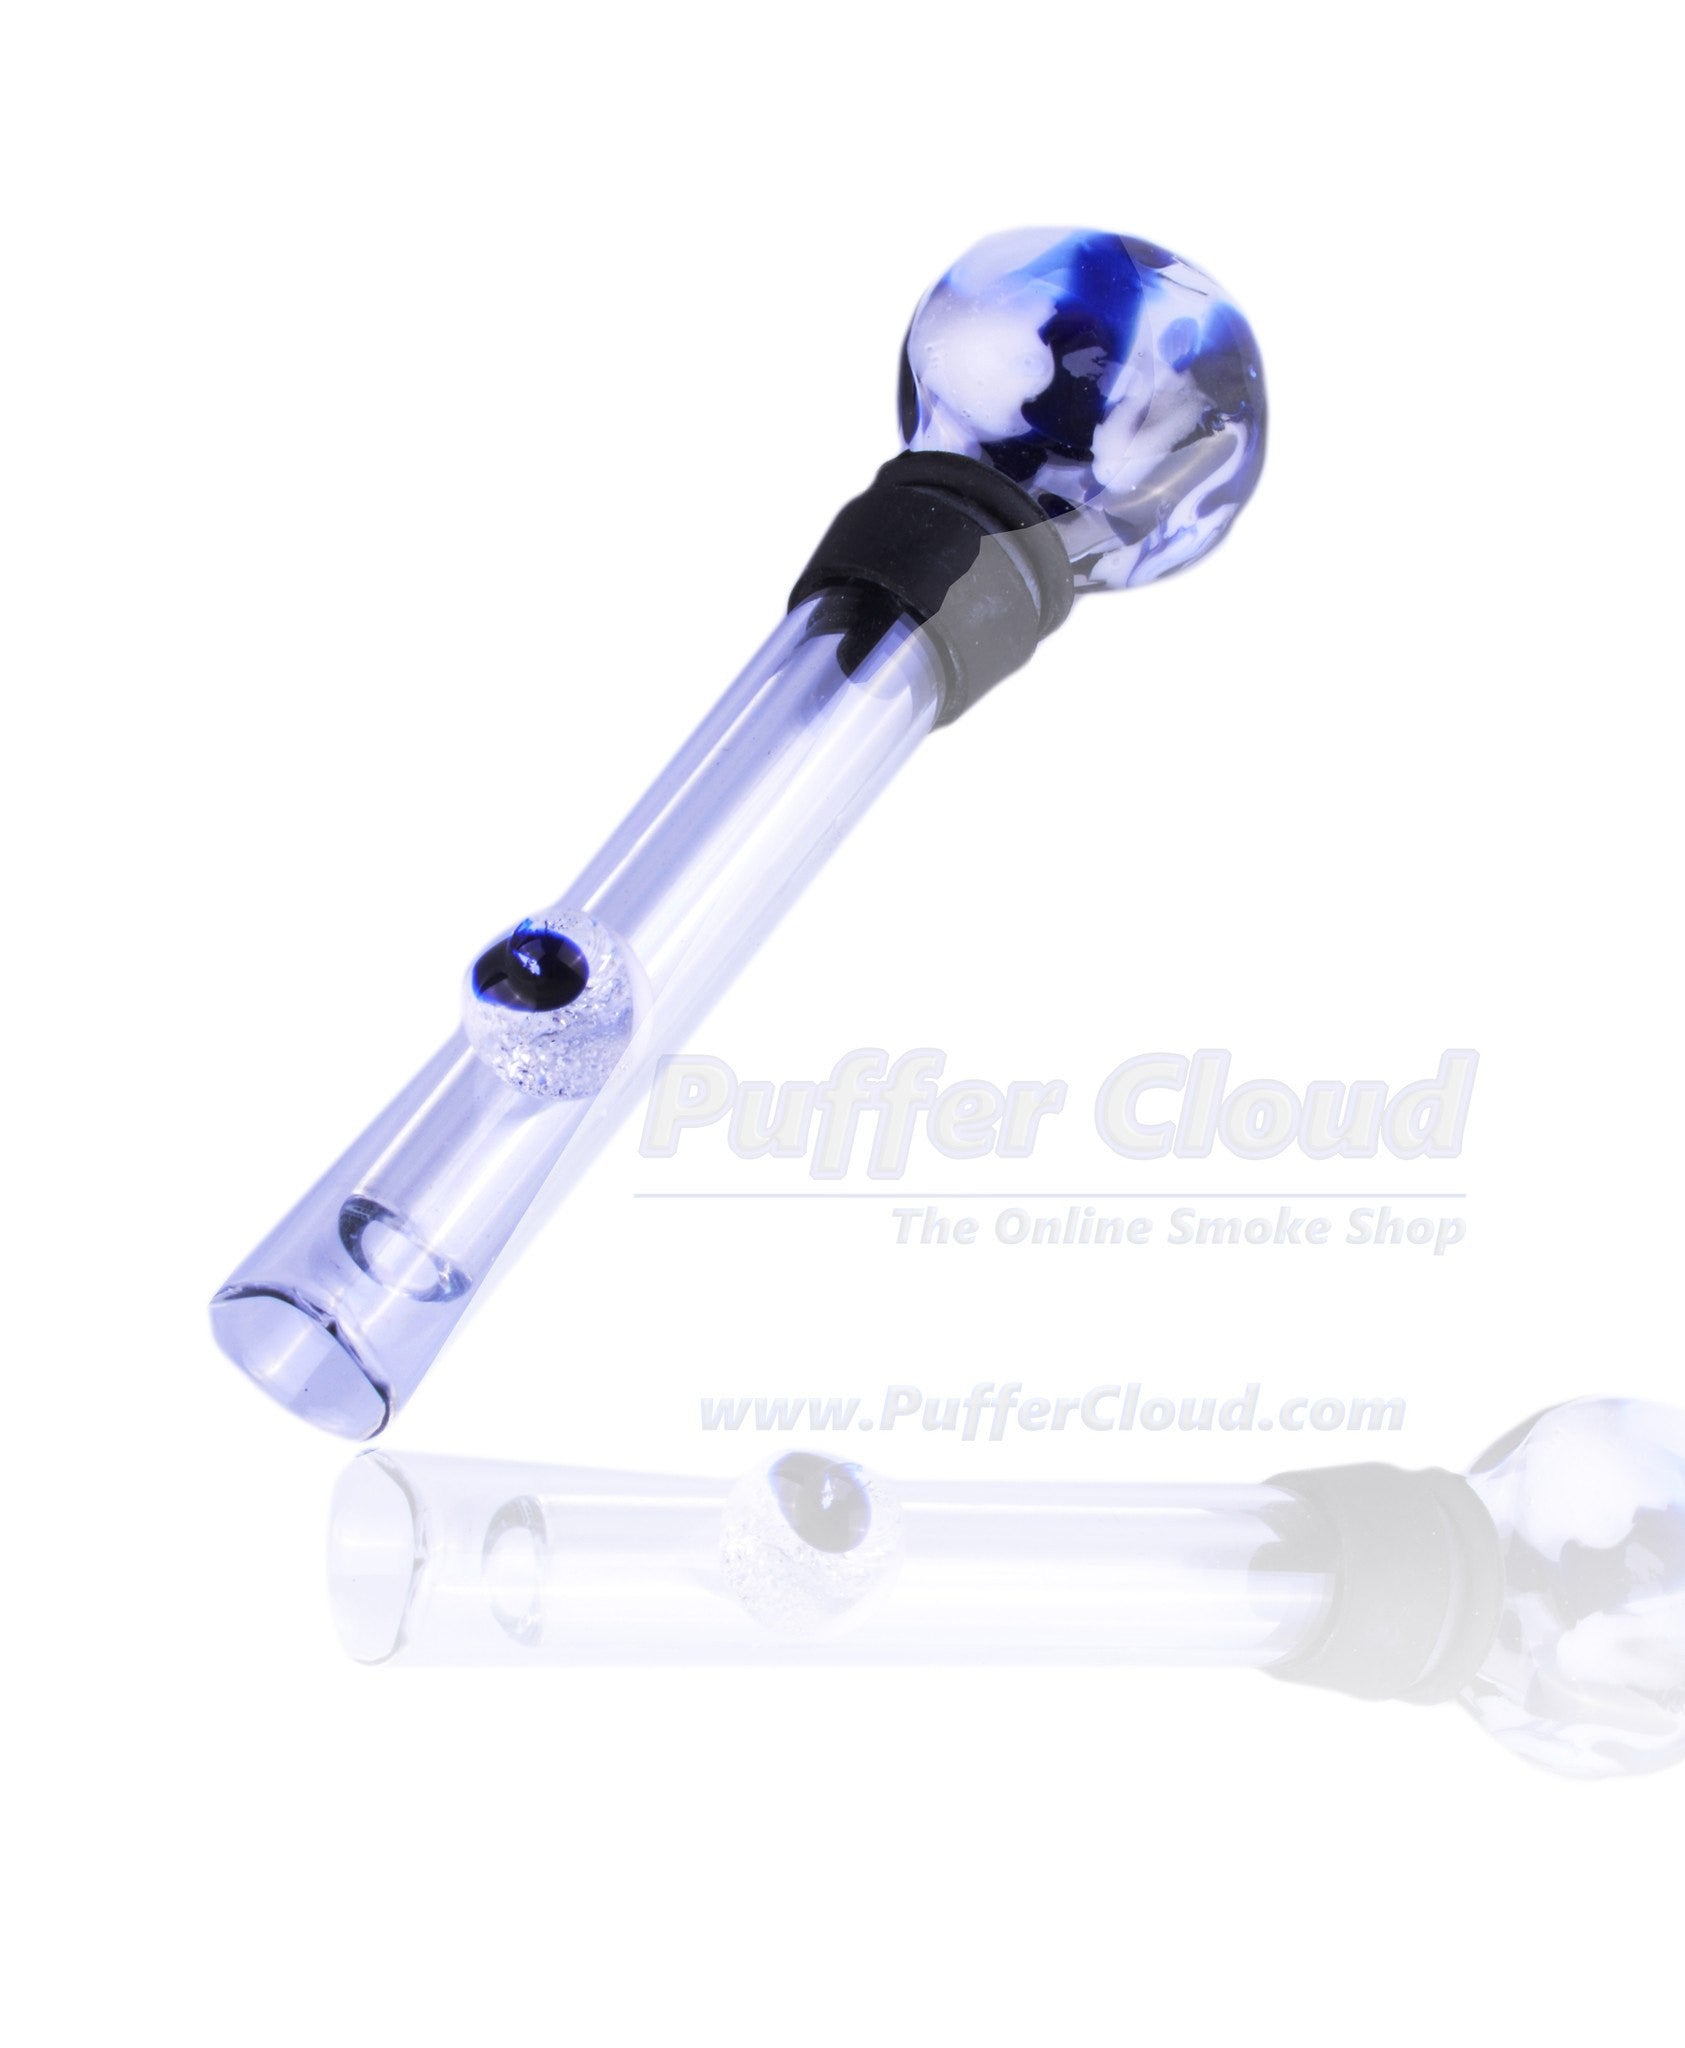 4.25" Glass Marble Blunt - Puffer Cloud | The World's Best Online Smoke and Head Shop